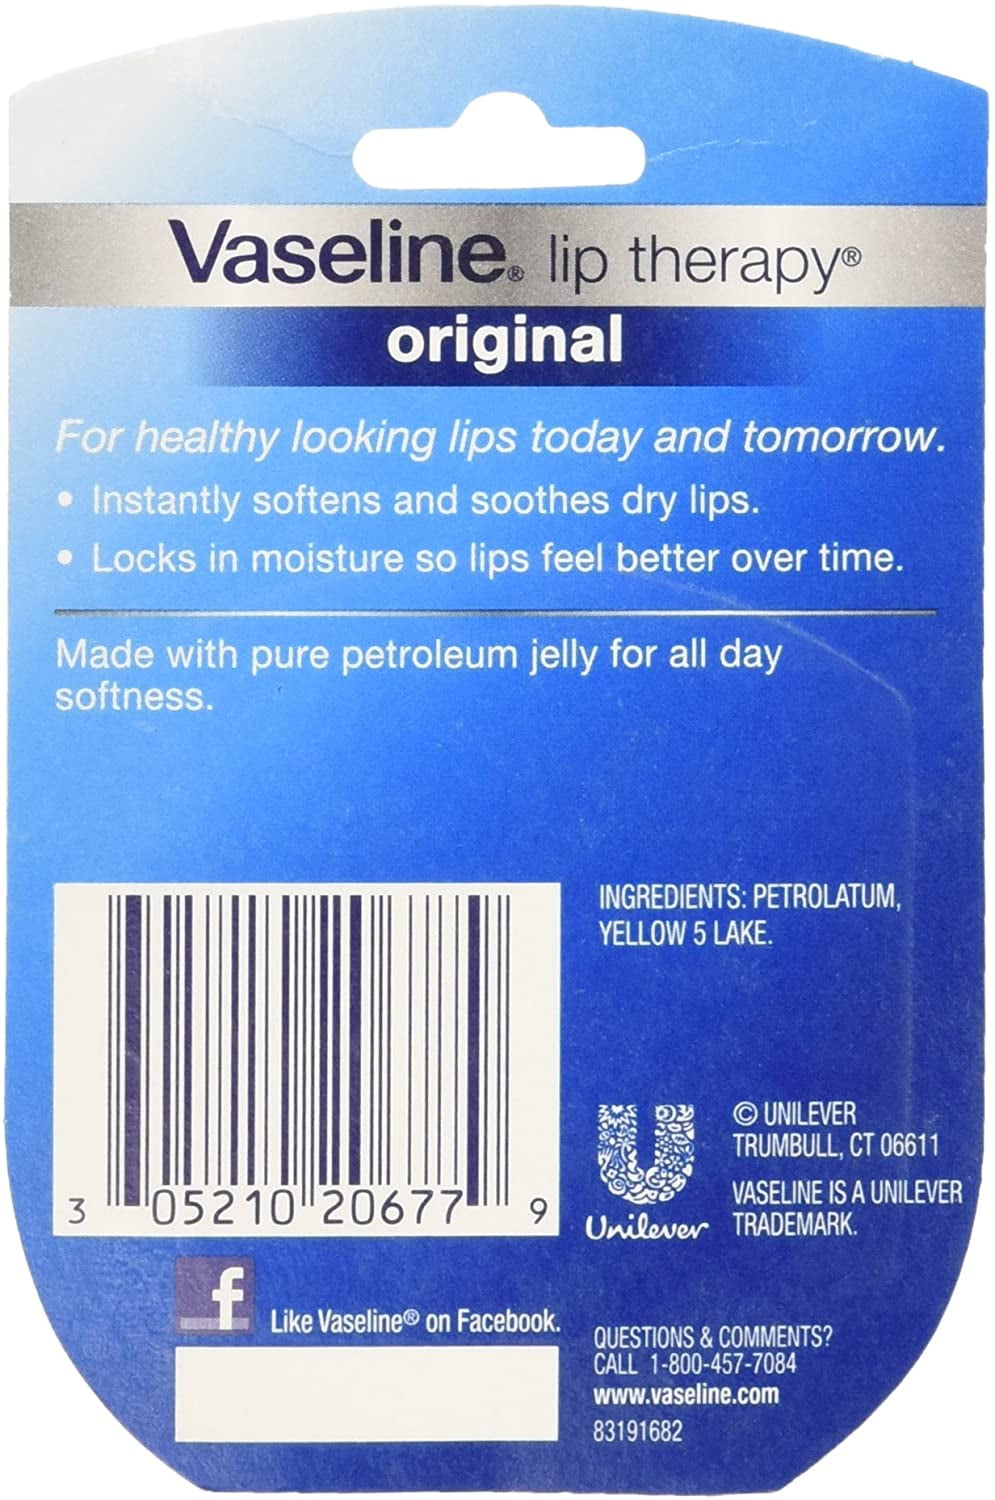 Waxelene Lip Balm Squeeze Tube, 0.25 oz Ingredients and Reviews